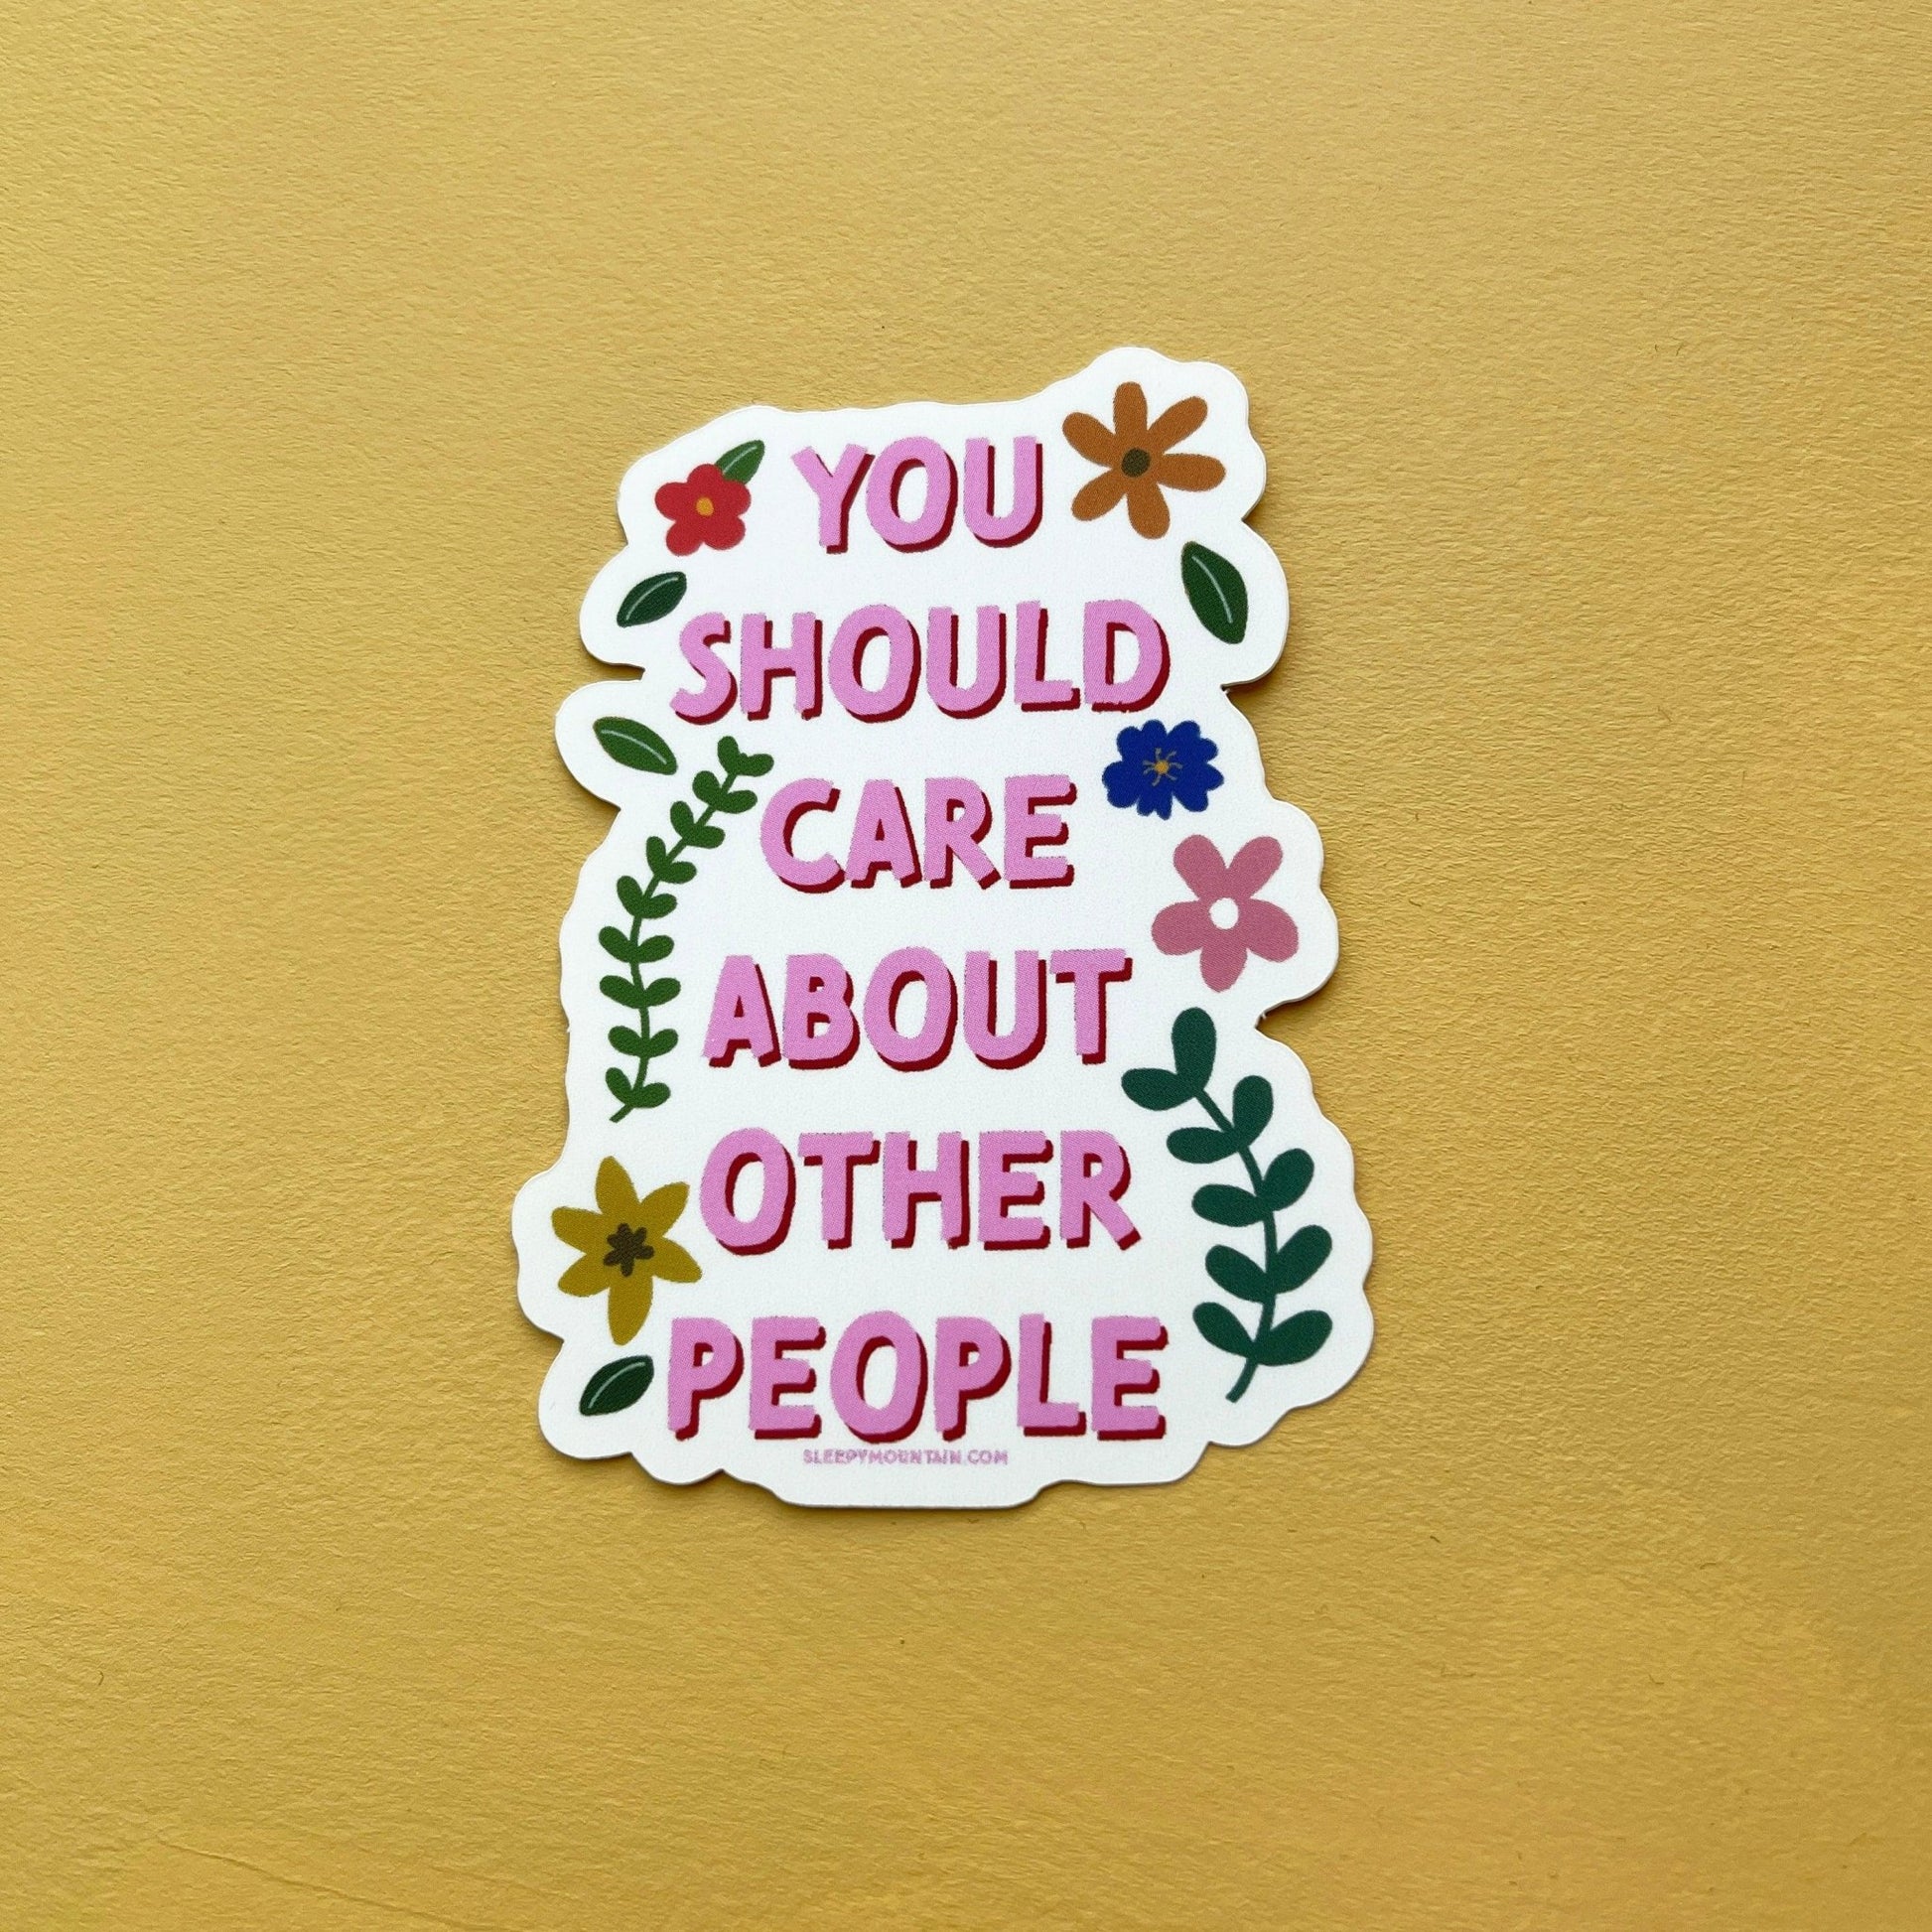 You should care about other people sticker - Sleepy Mountain